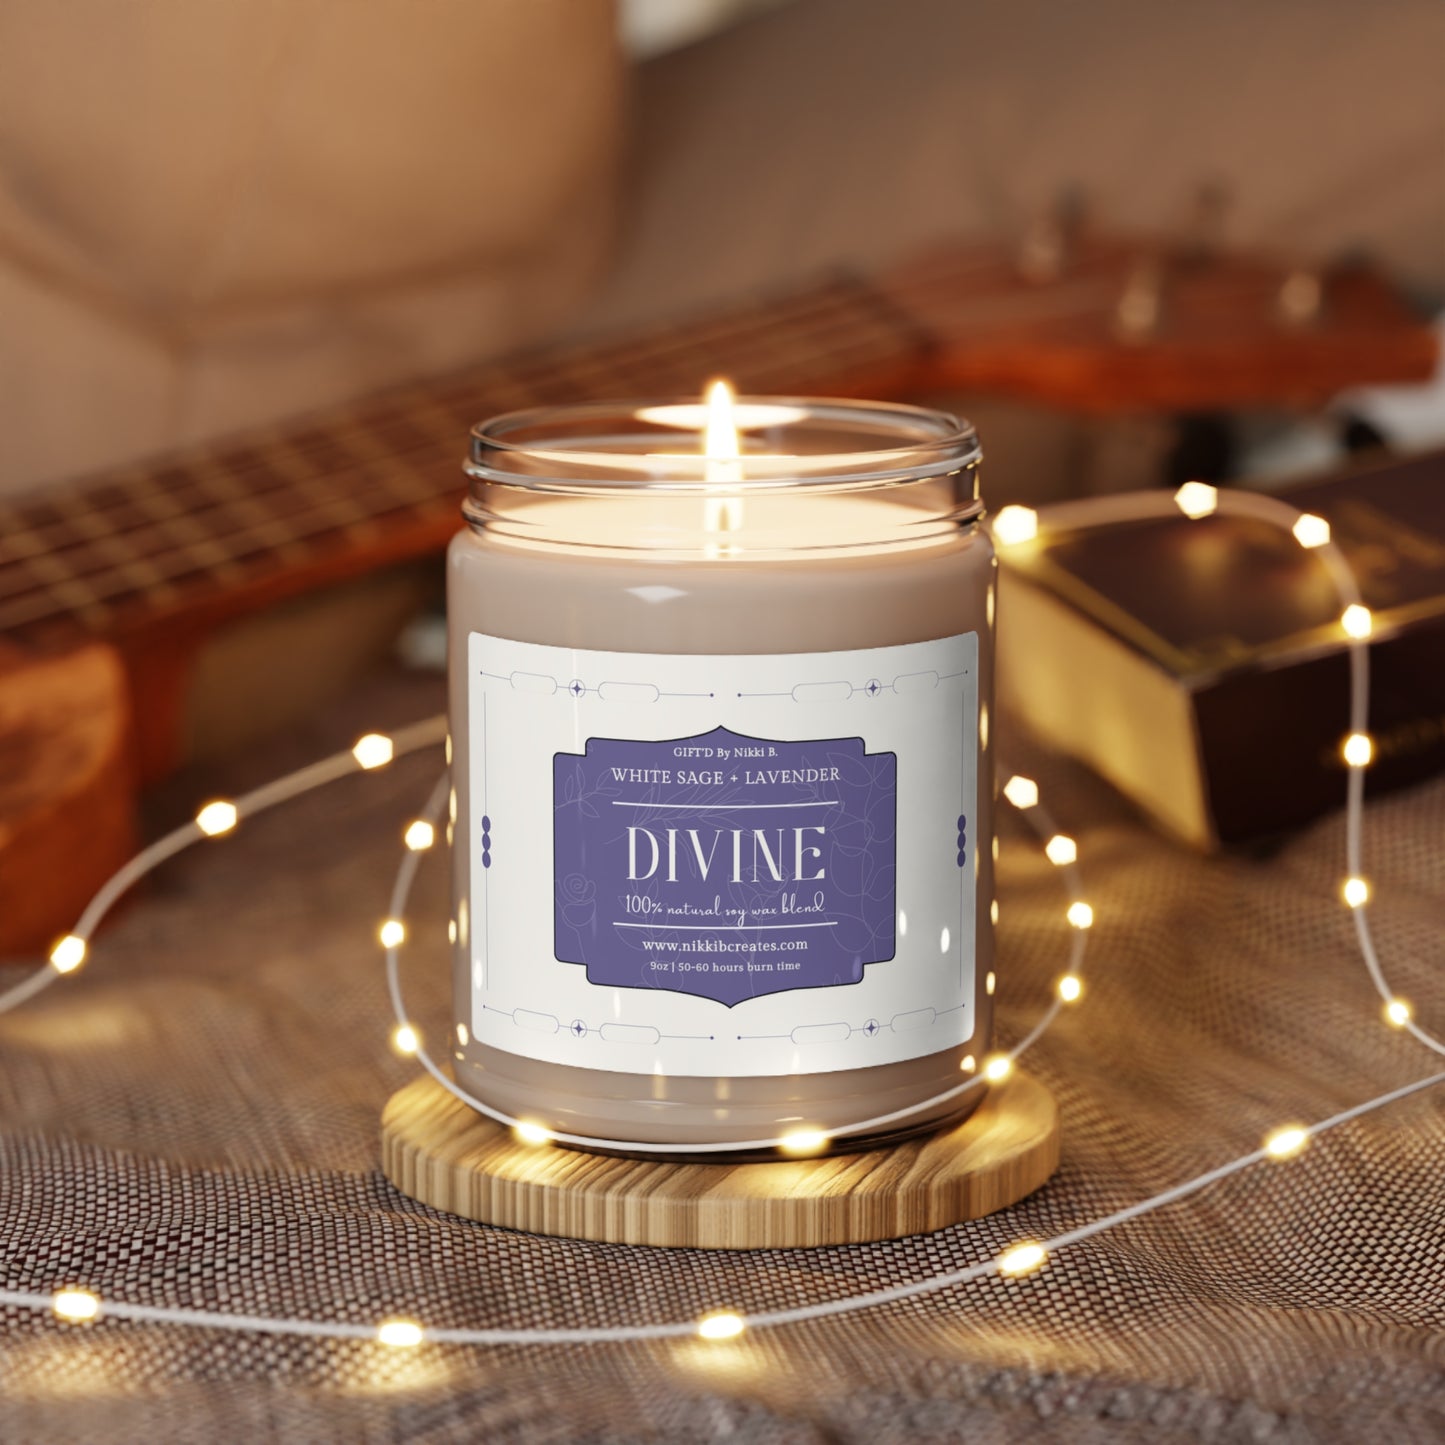 DIVINE Scented Candle, 9oz